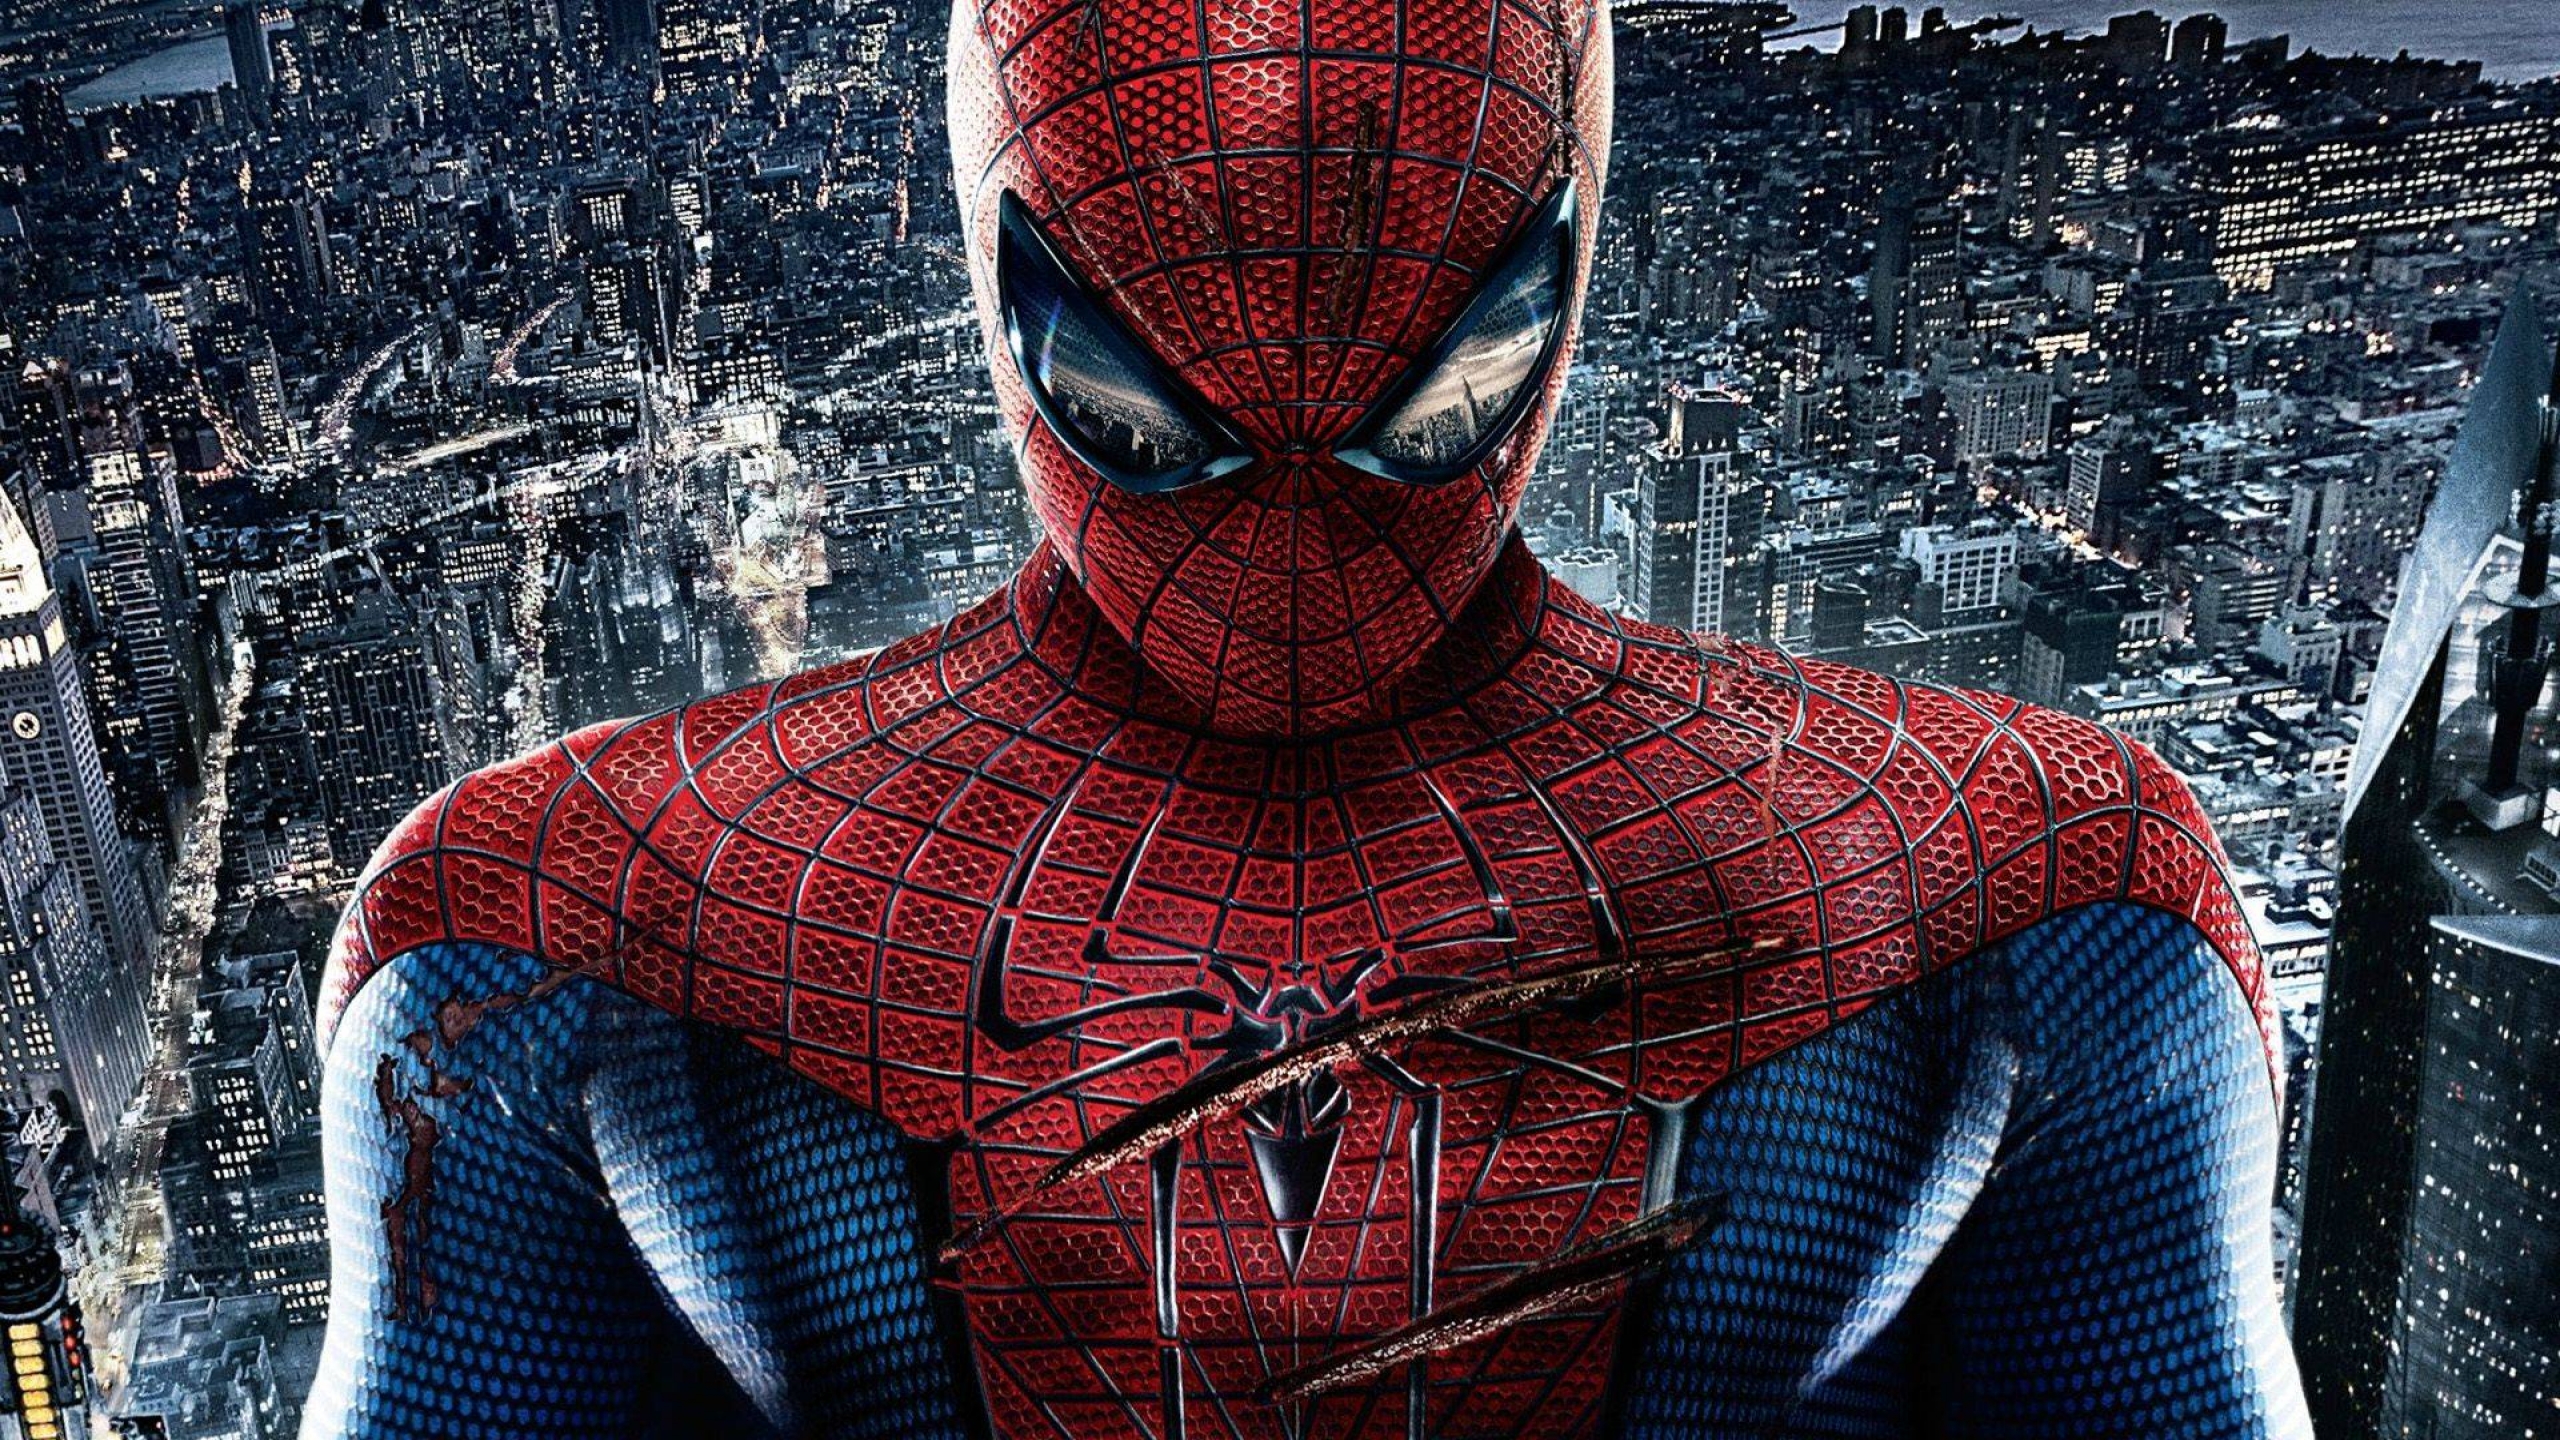 Spider Man Wallpapers Hd